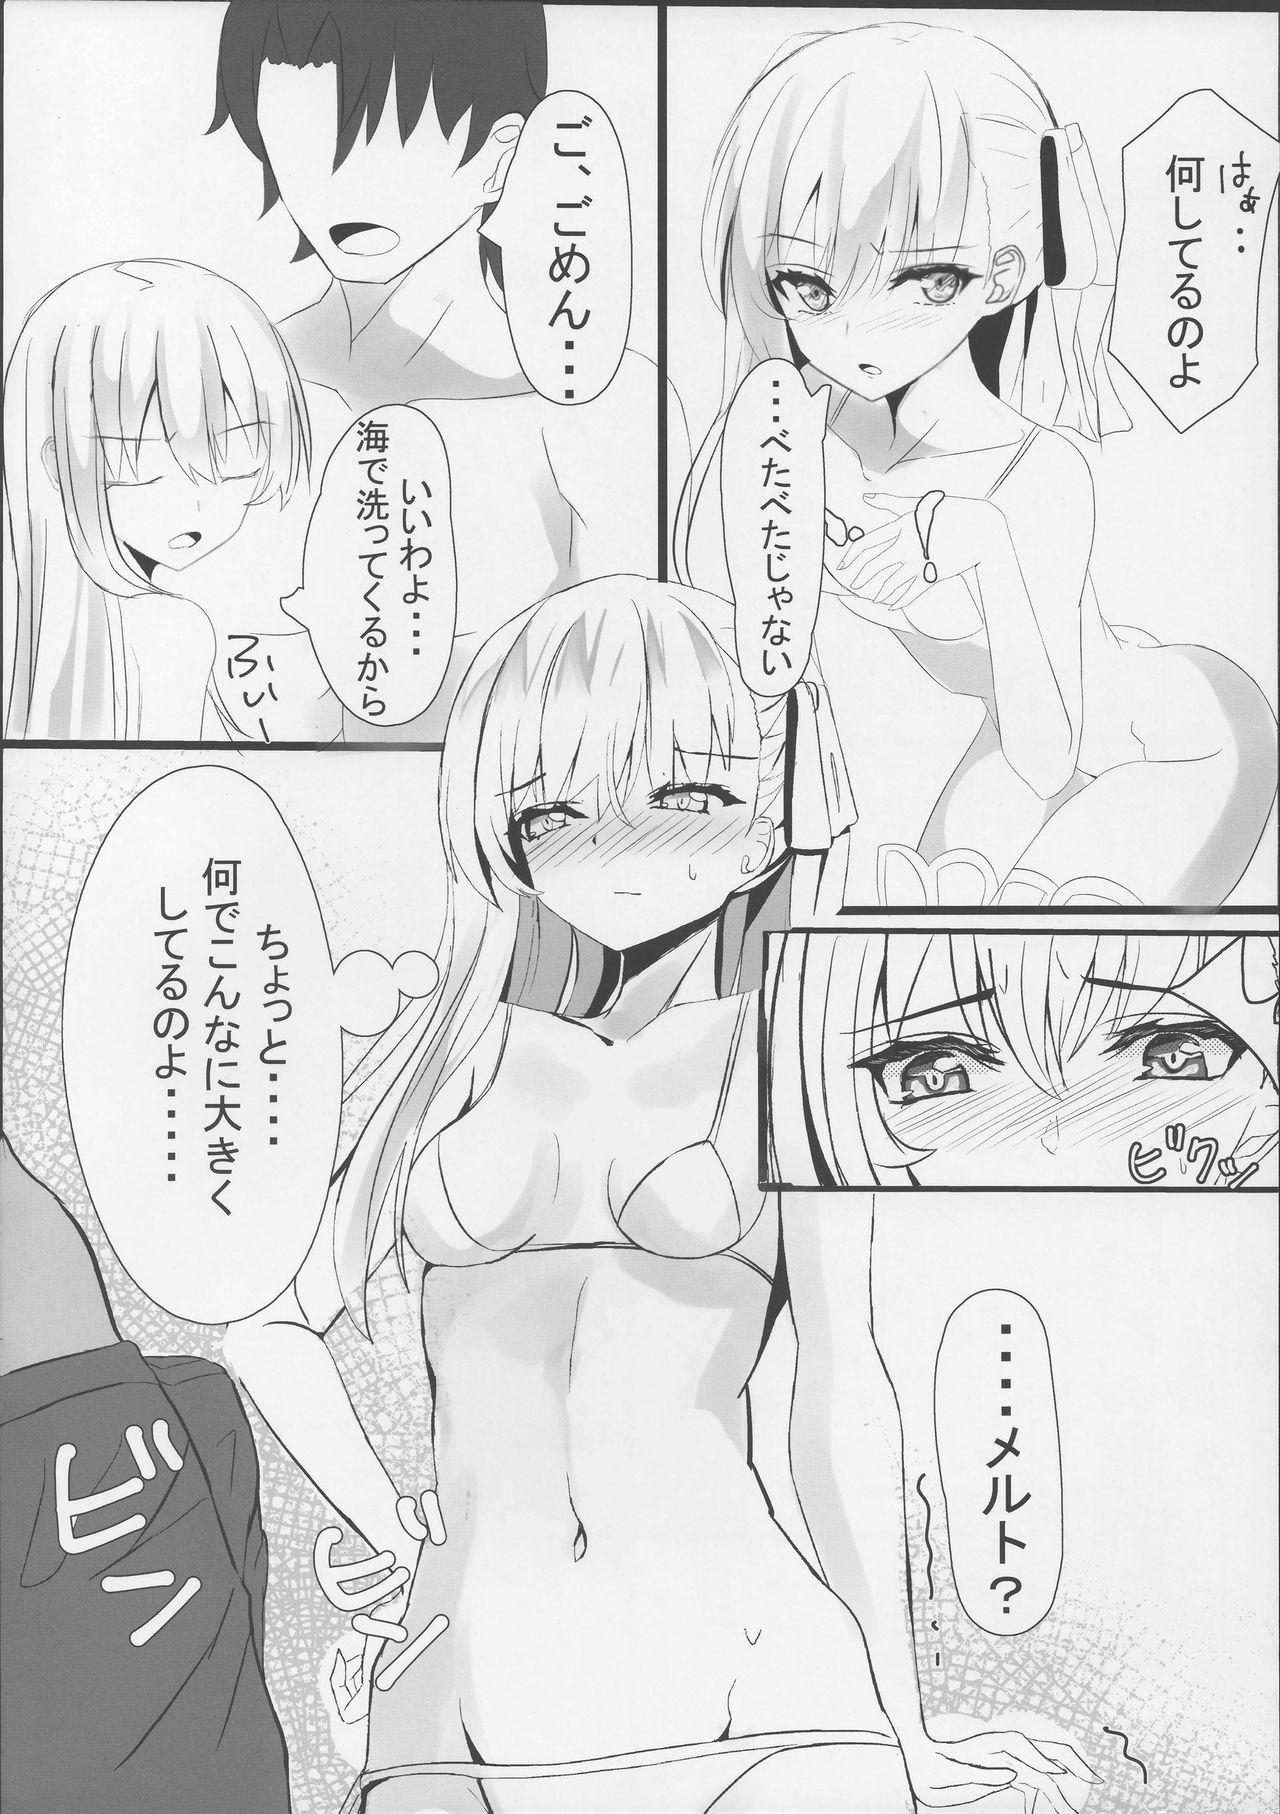 Lesbians Melt down 2 - Fate grand order Glasses - Page 7